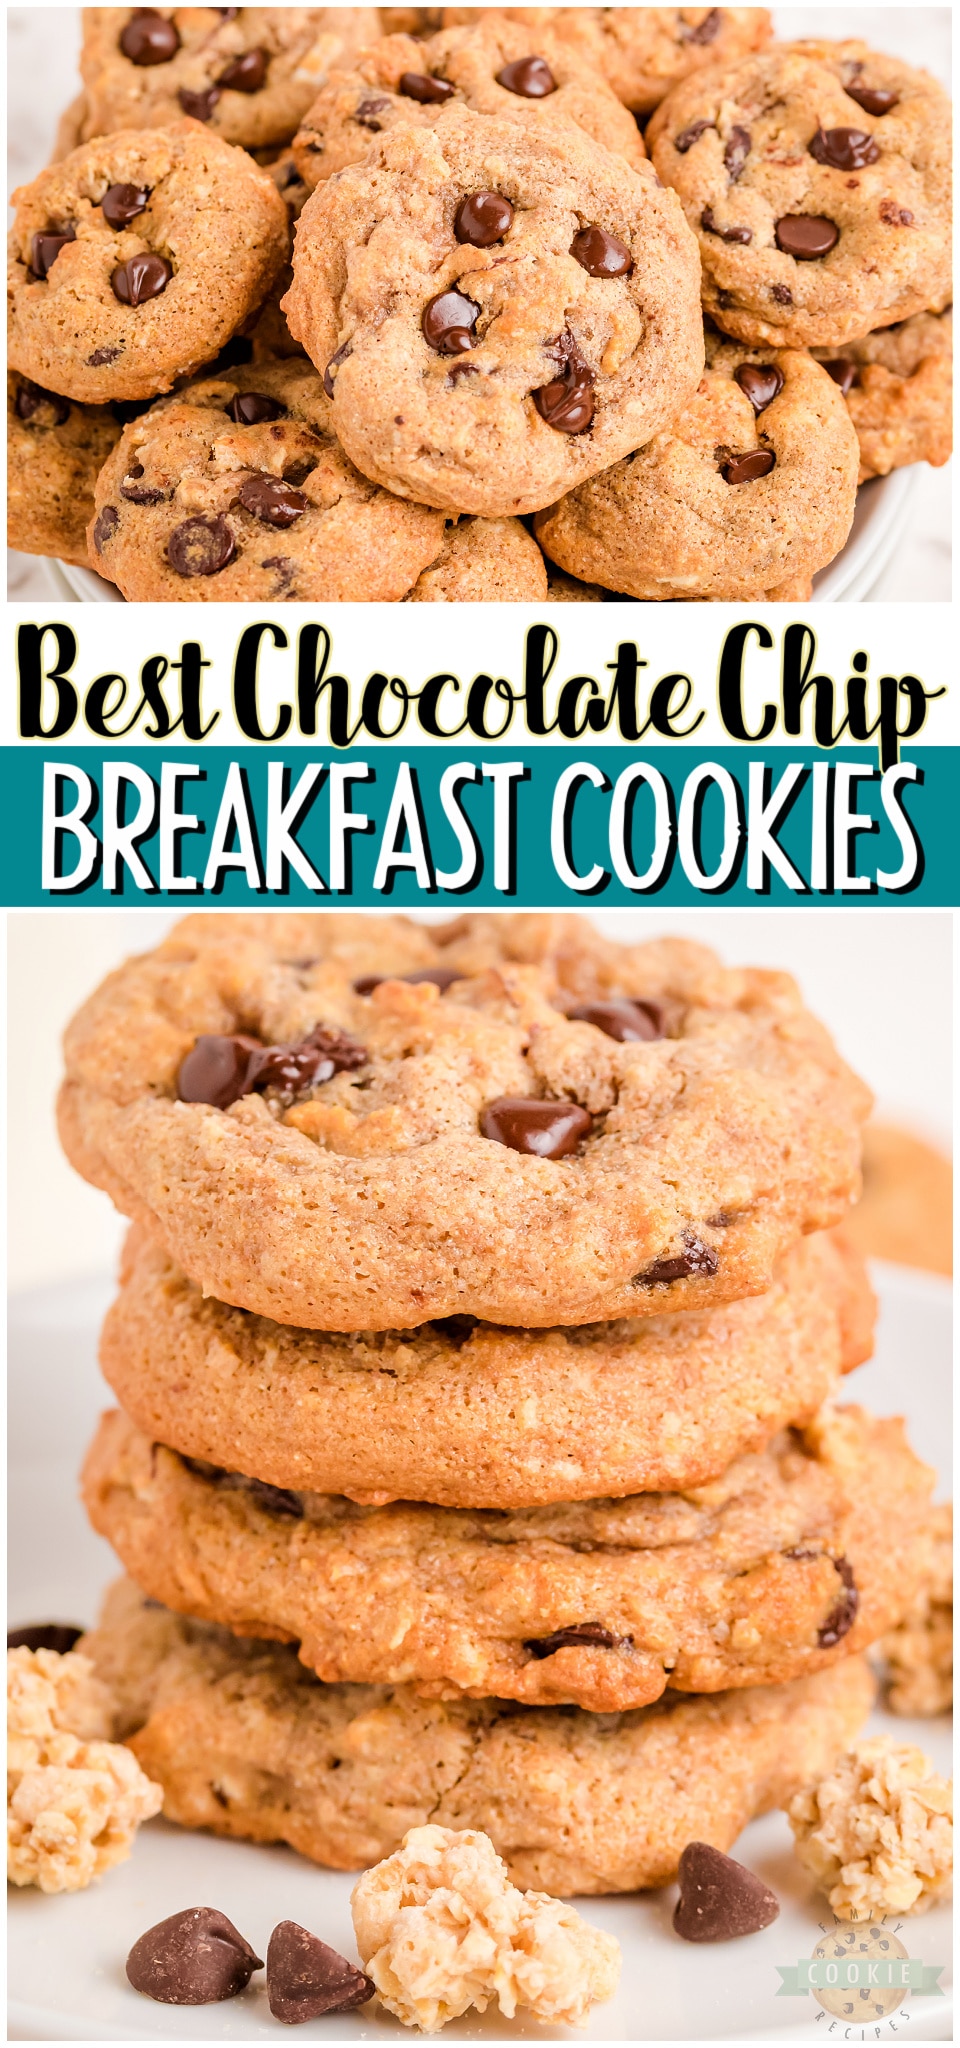 Breakfast chocolate chip cookies are a perfect snack that you can feel good about. Whole wheat flour, applesauce, granola, & dark chocolate combine to make tasty low-calorie & low sugar cookies!